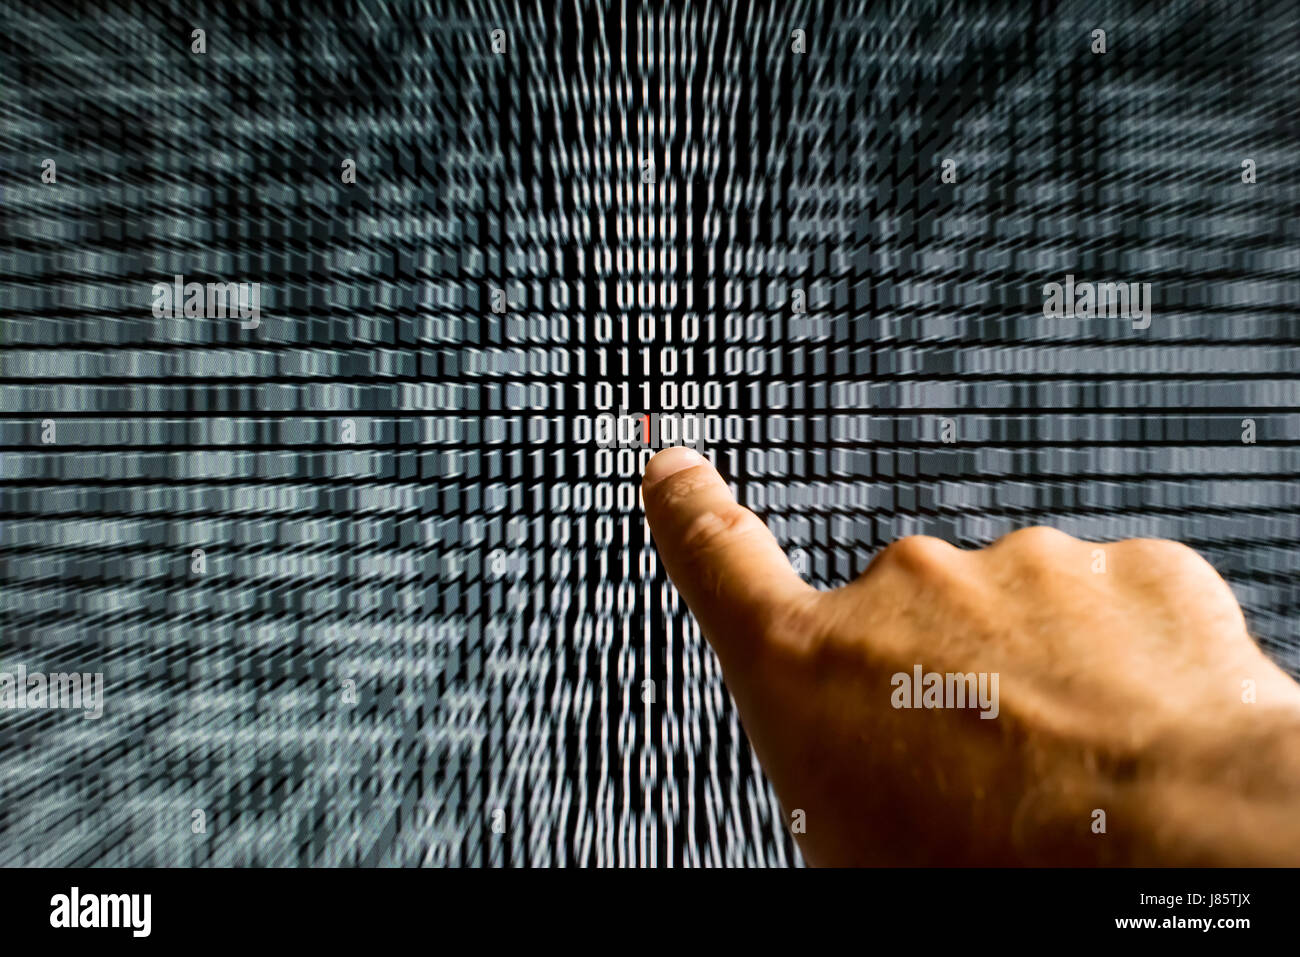 Finger pointing at a red bit figuring a bug a binary code on a screen Stock Photo